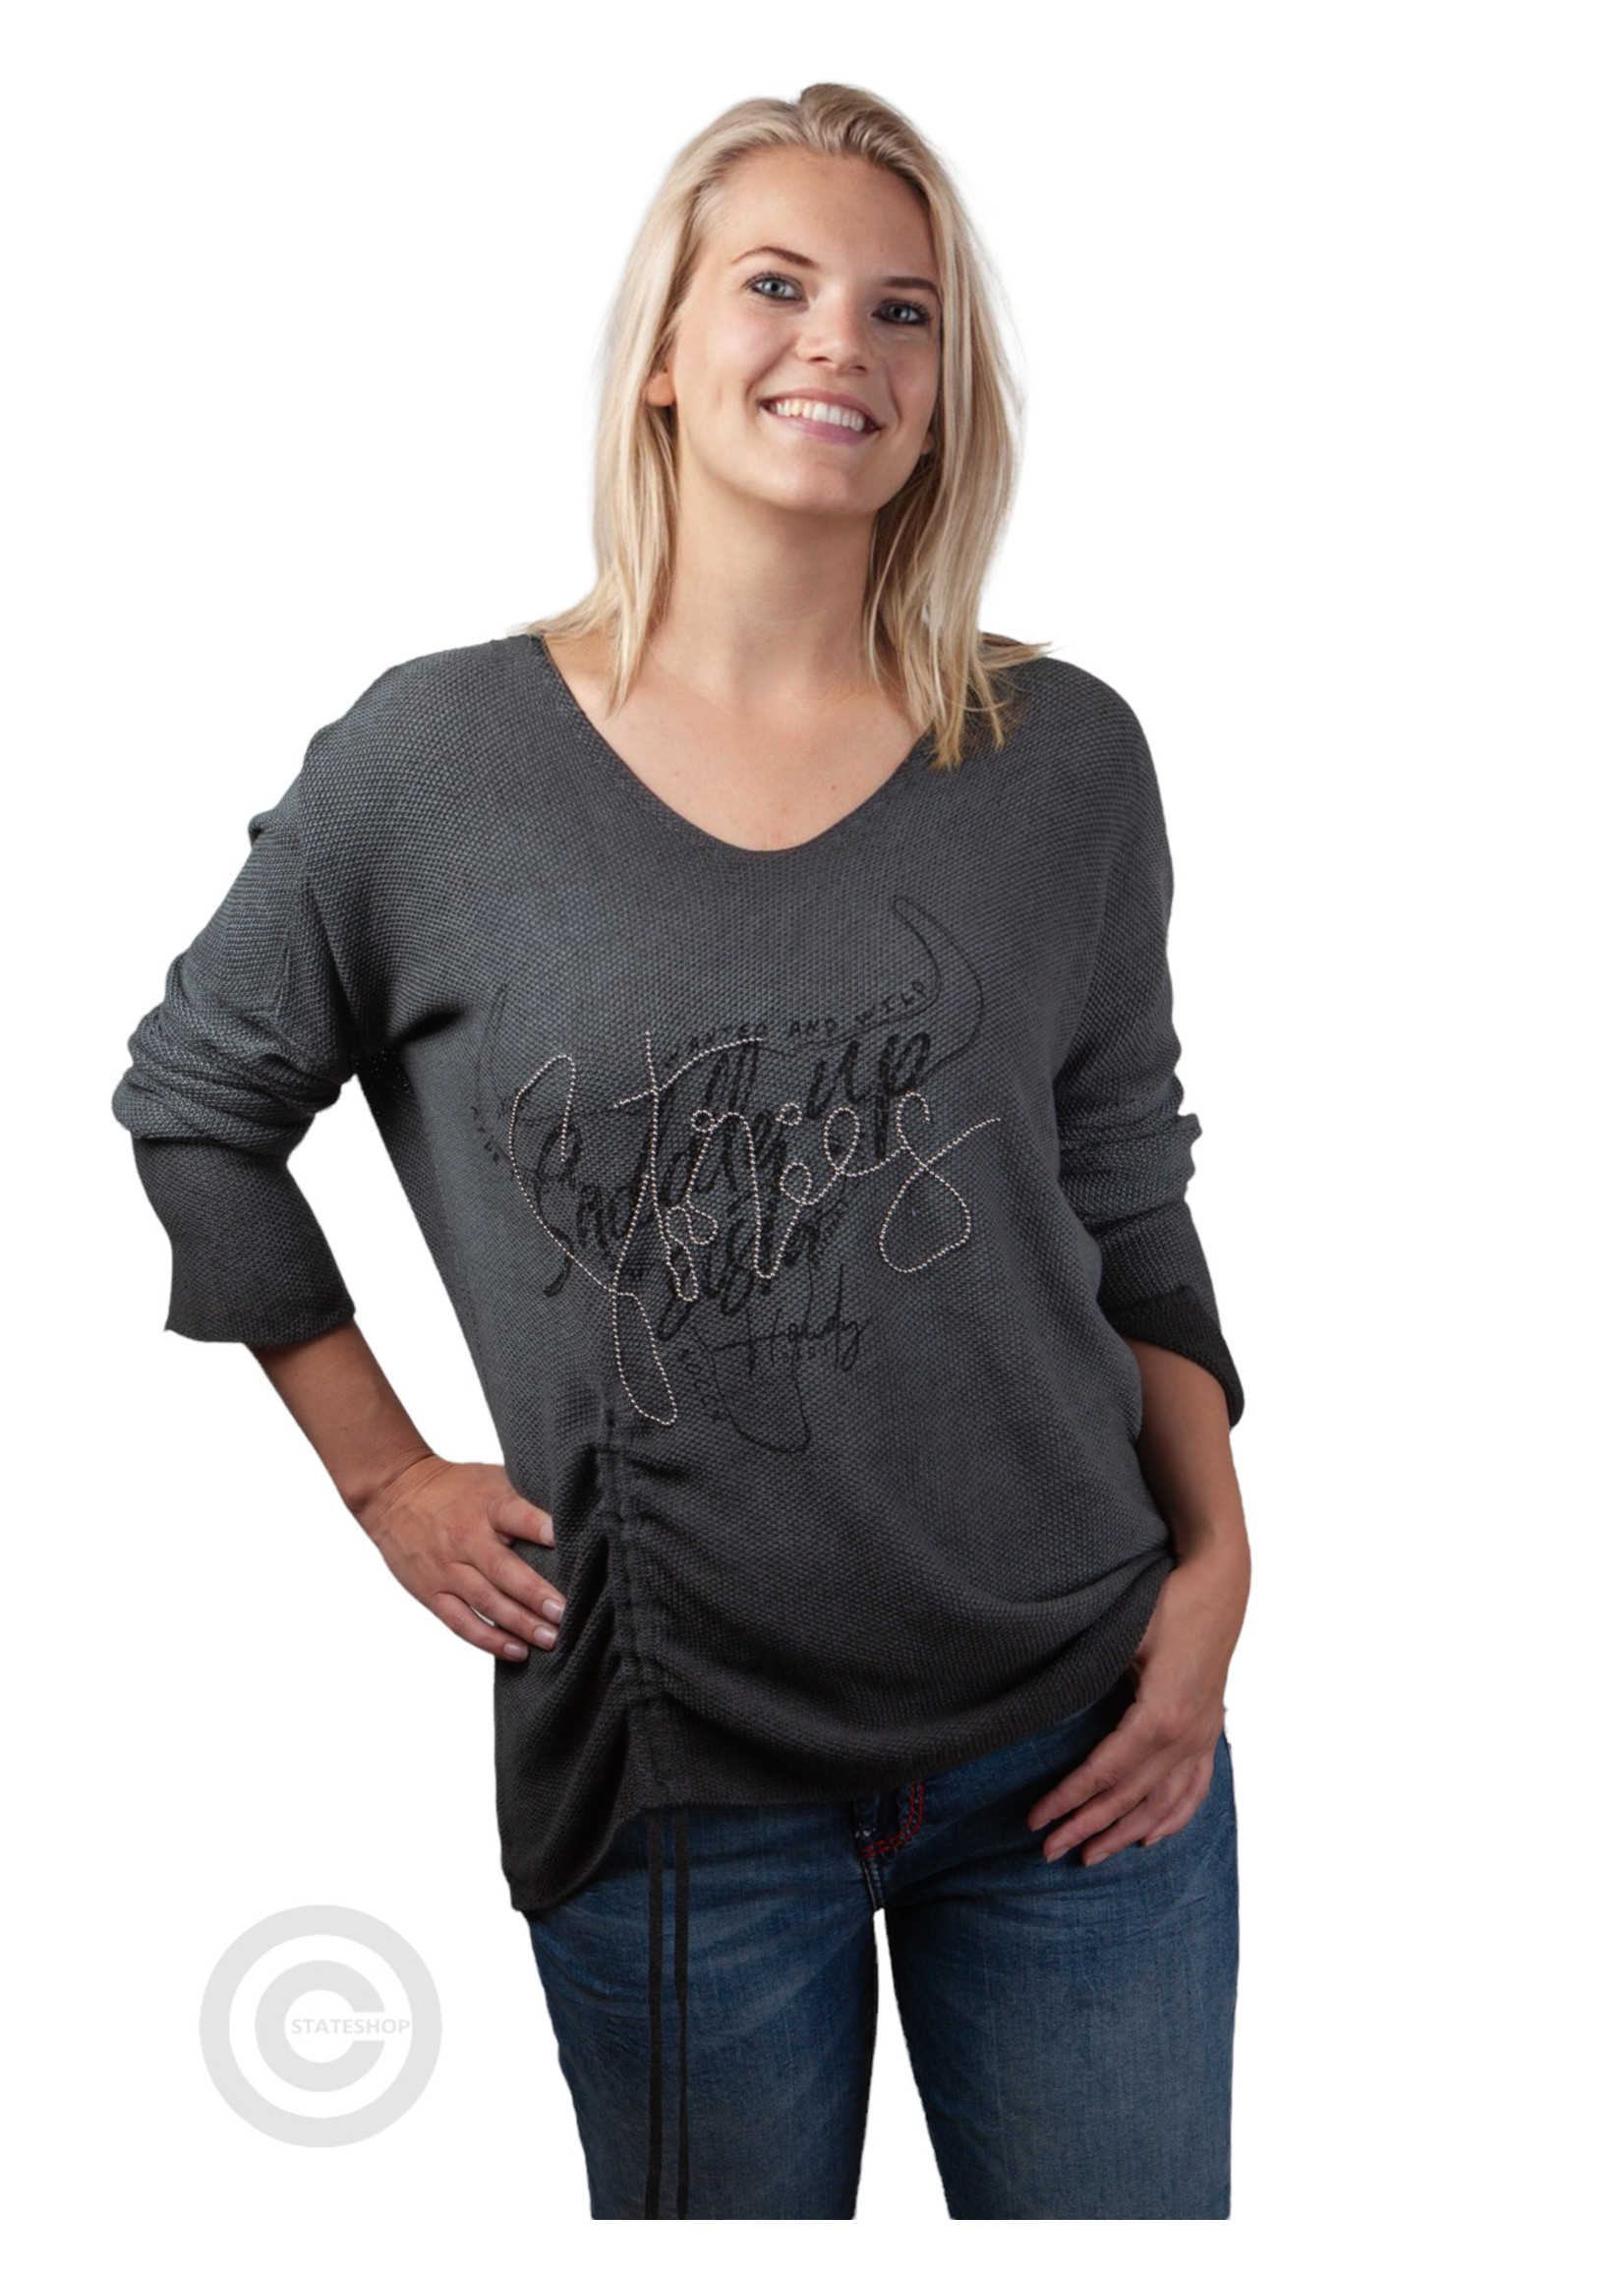 Soccx  Soccx ® sweater with pearl pattern, artwork and pleats